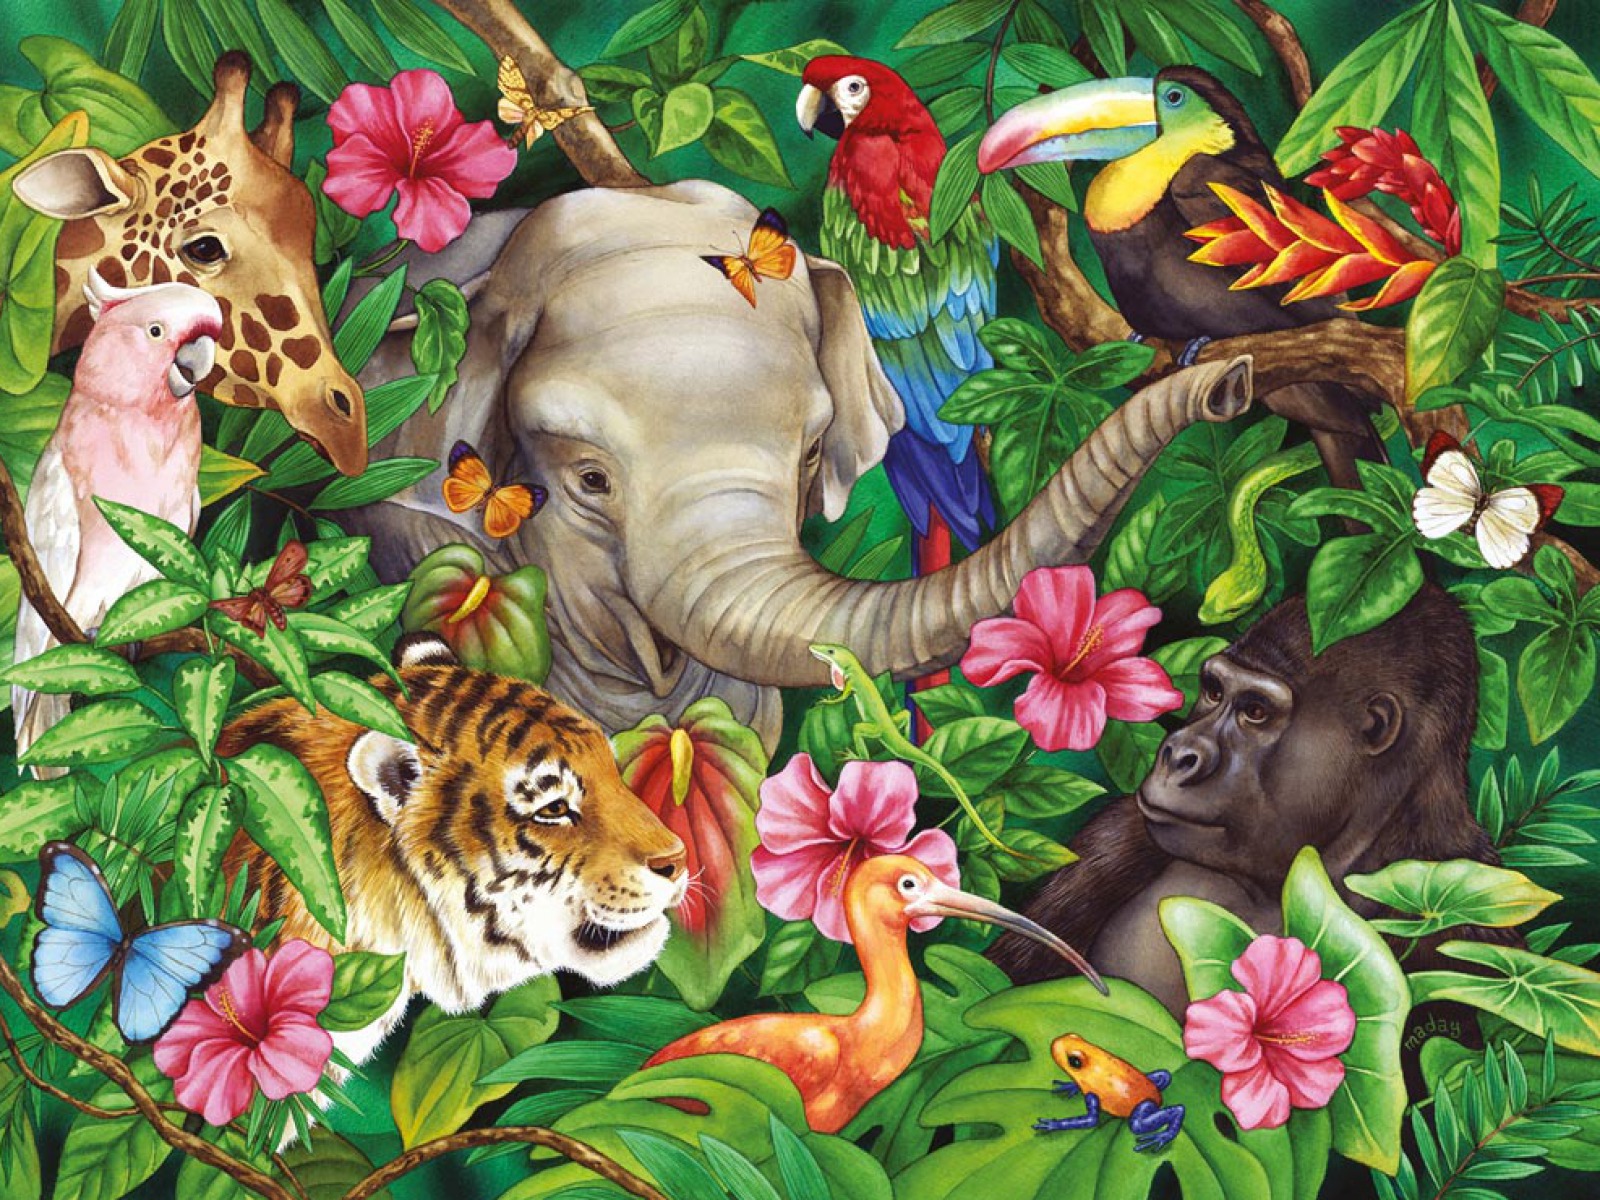 Jungle Animals Two wallpapers Jungle Animals Two stock photos